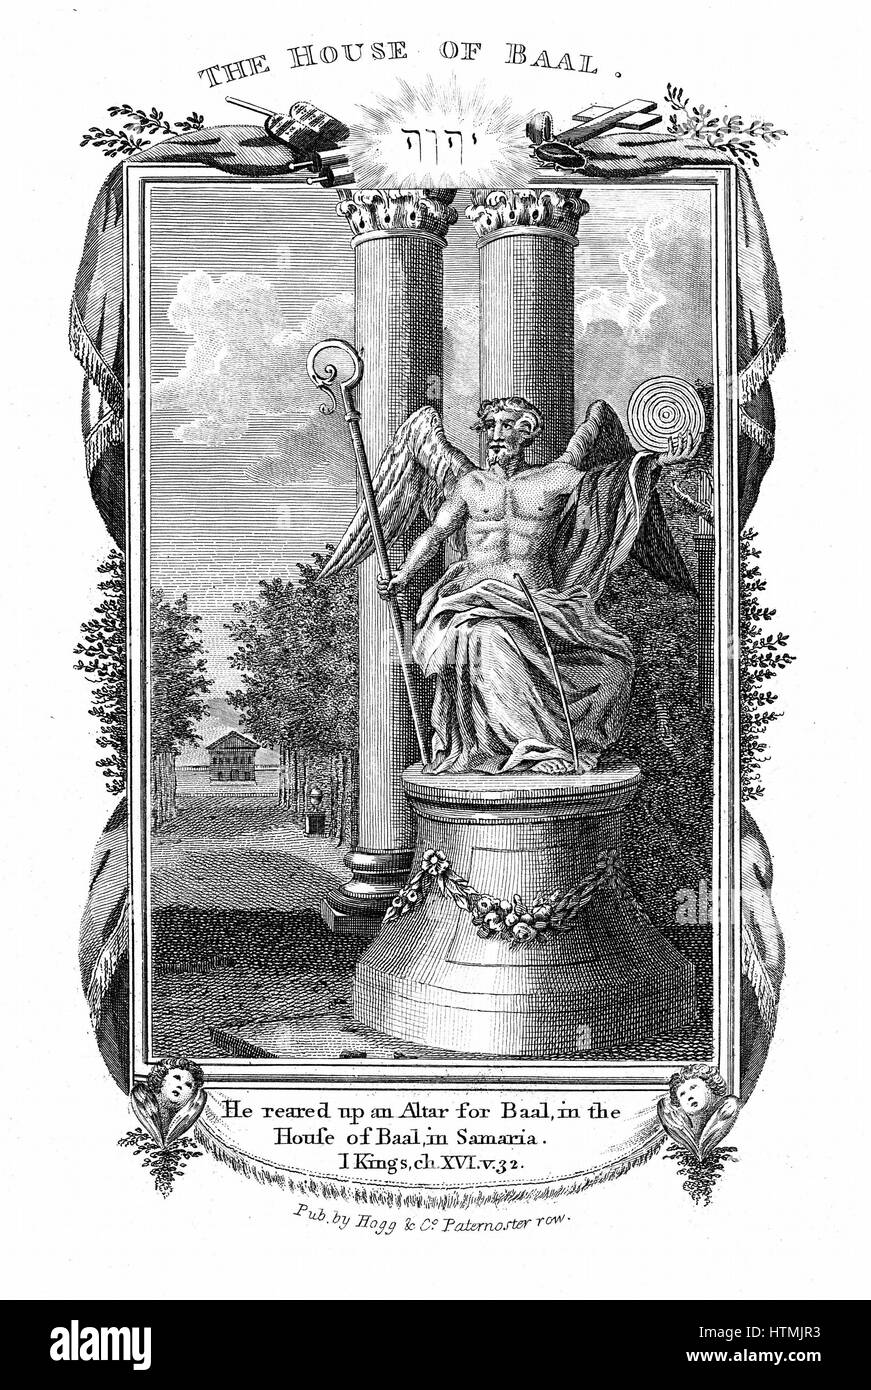 Baal, god of fertility and king of the gods of the Canaanites. "He reared up an altar for Baal, in the house of Baal , in Samaria". I Kings 16:32 From evangelical "Bible" published c.1804. Engraving. Stock Photo